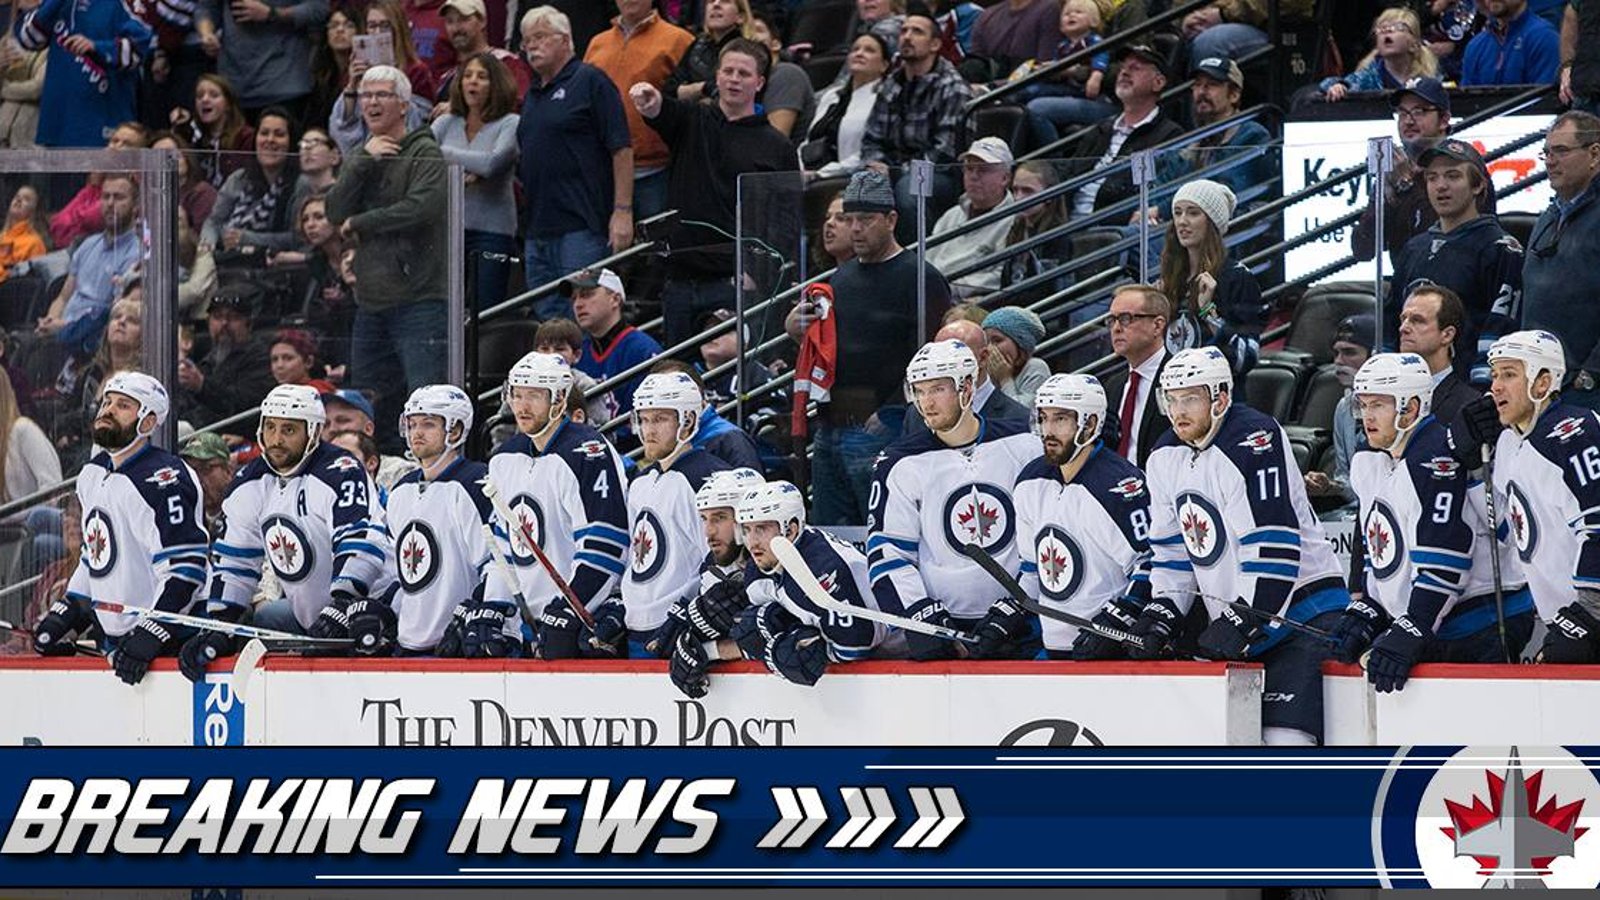 Breaking News: Jets game scheduled tonight will not take place as expected.